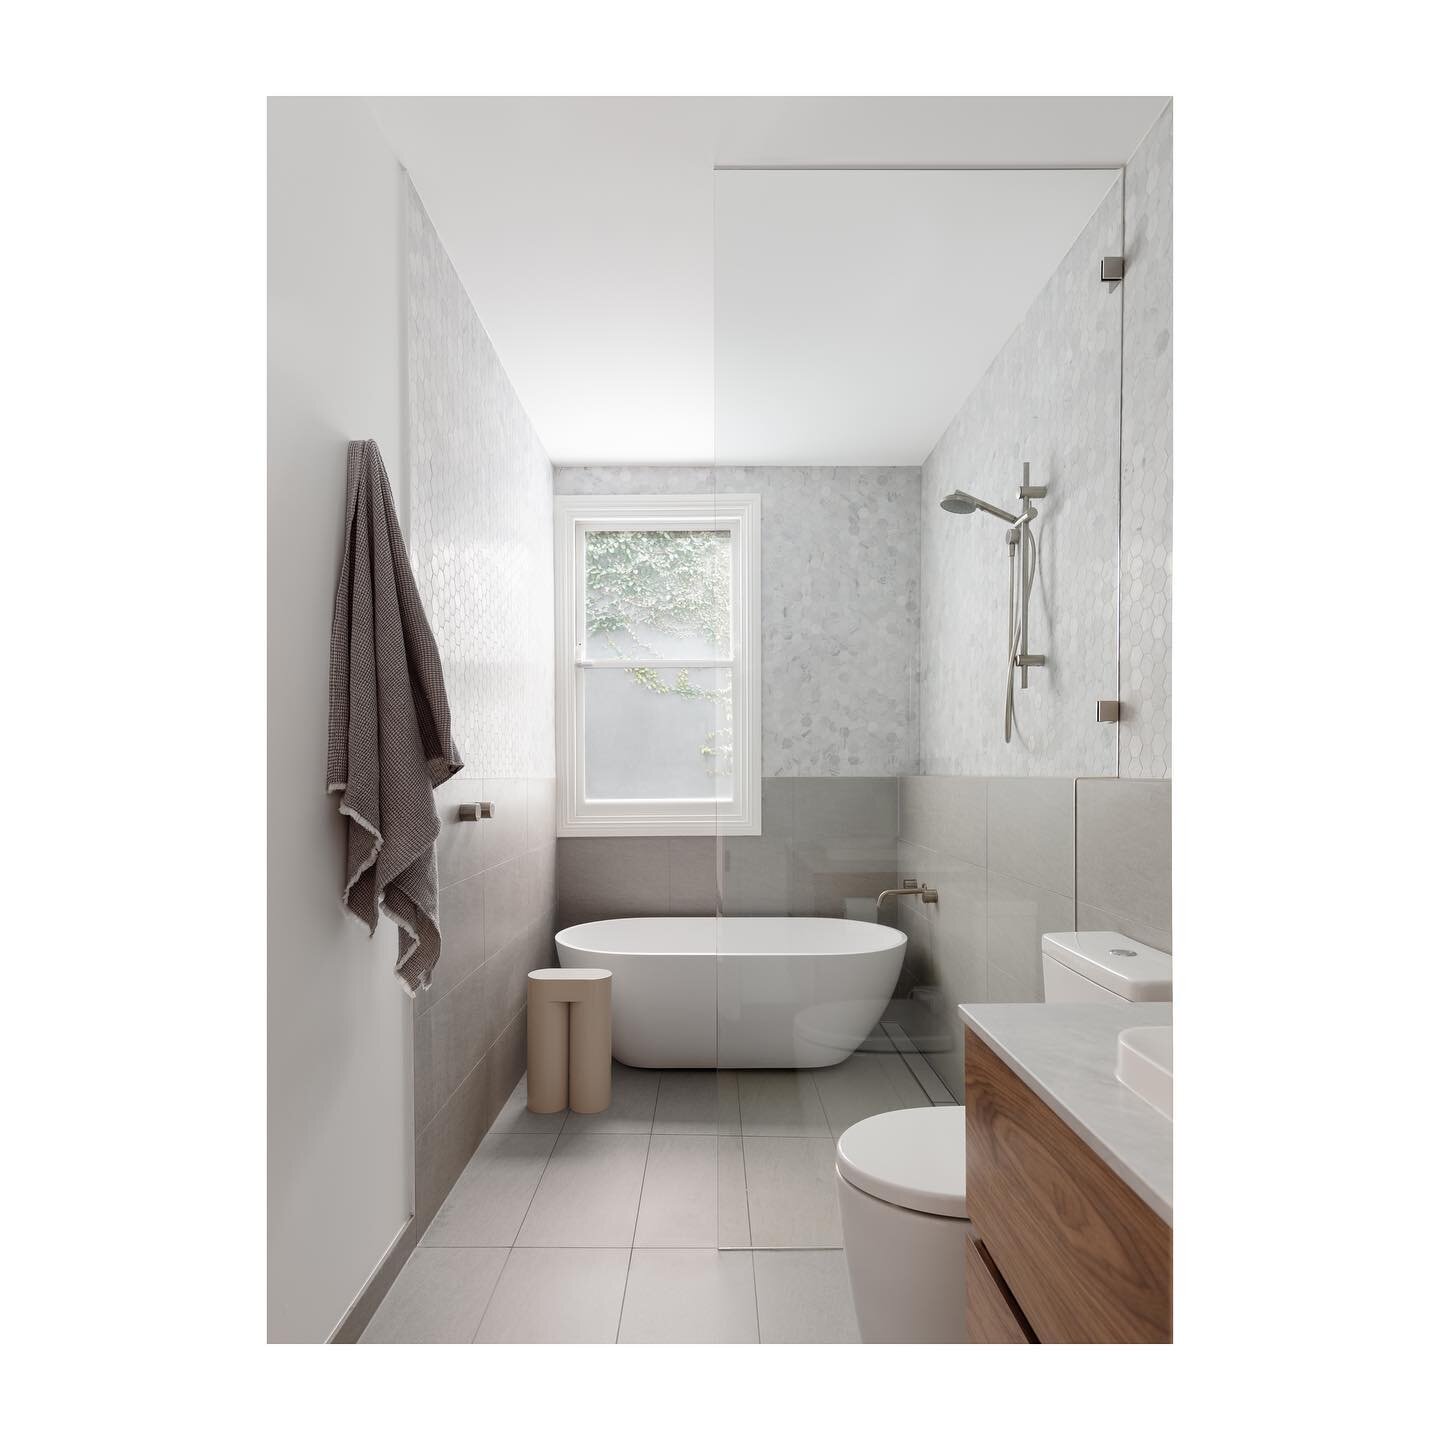 The small footprint of the bathroom meant the bathtub and shower would form a unified wet room to allow for the vanity and toilet to remain within the same space. The laundry was separated from the bathroom by cleverly creating a nook within the hall